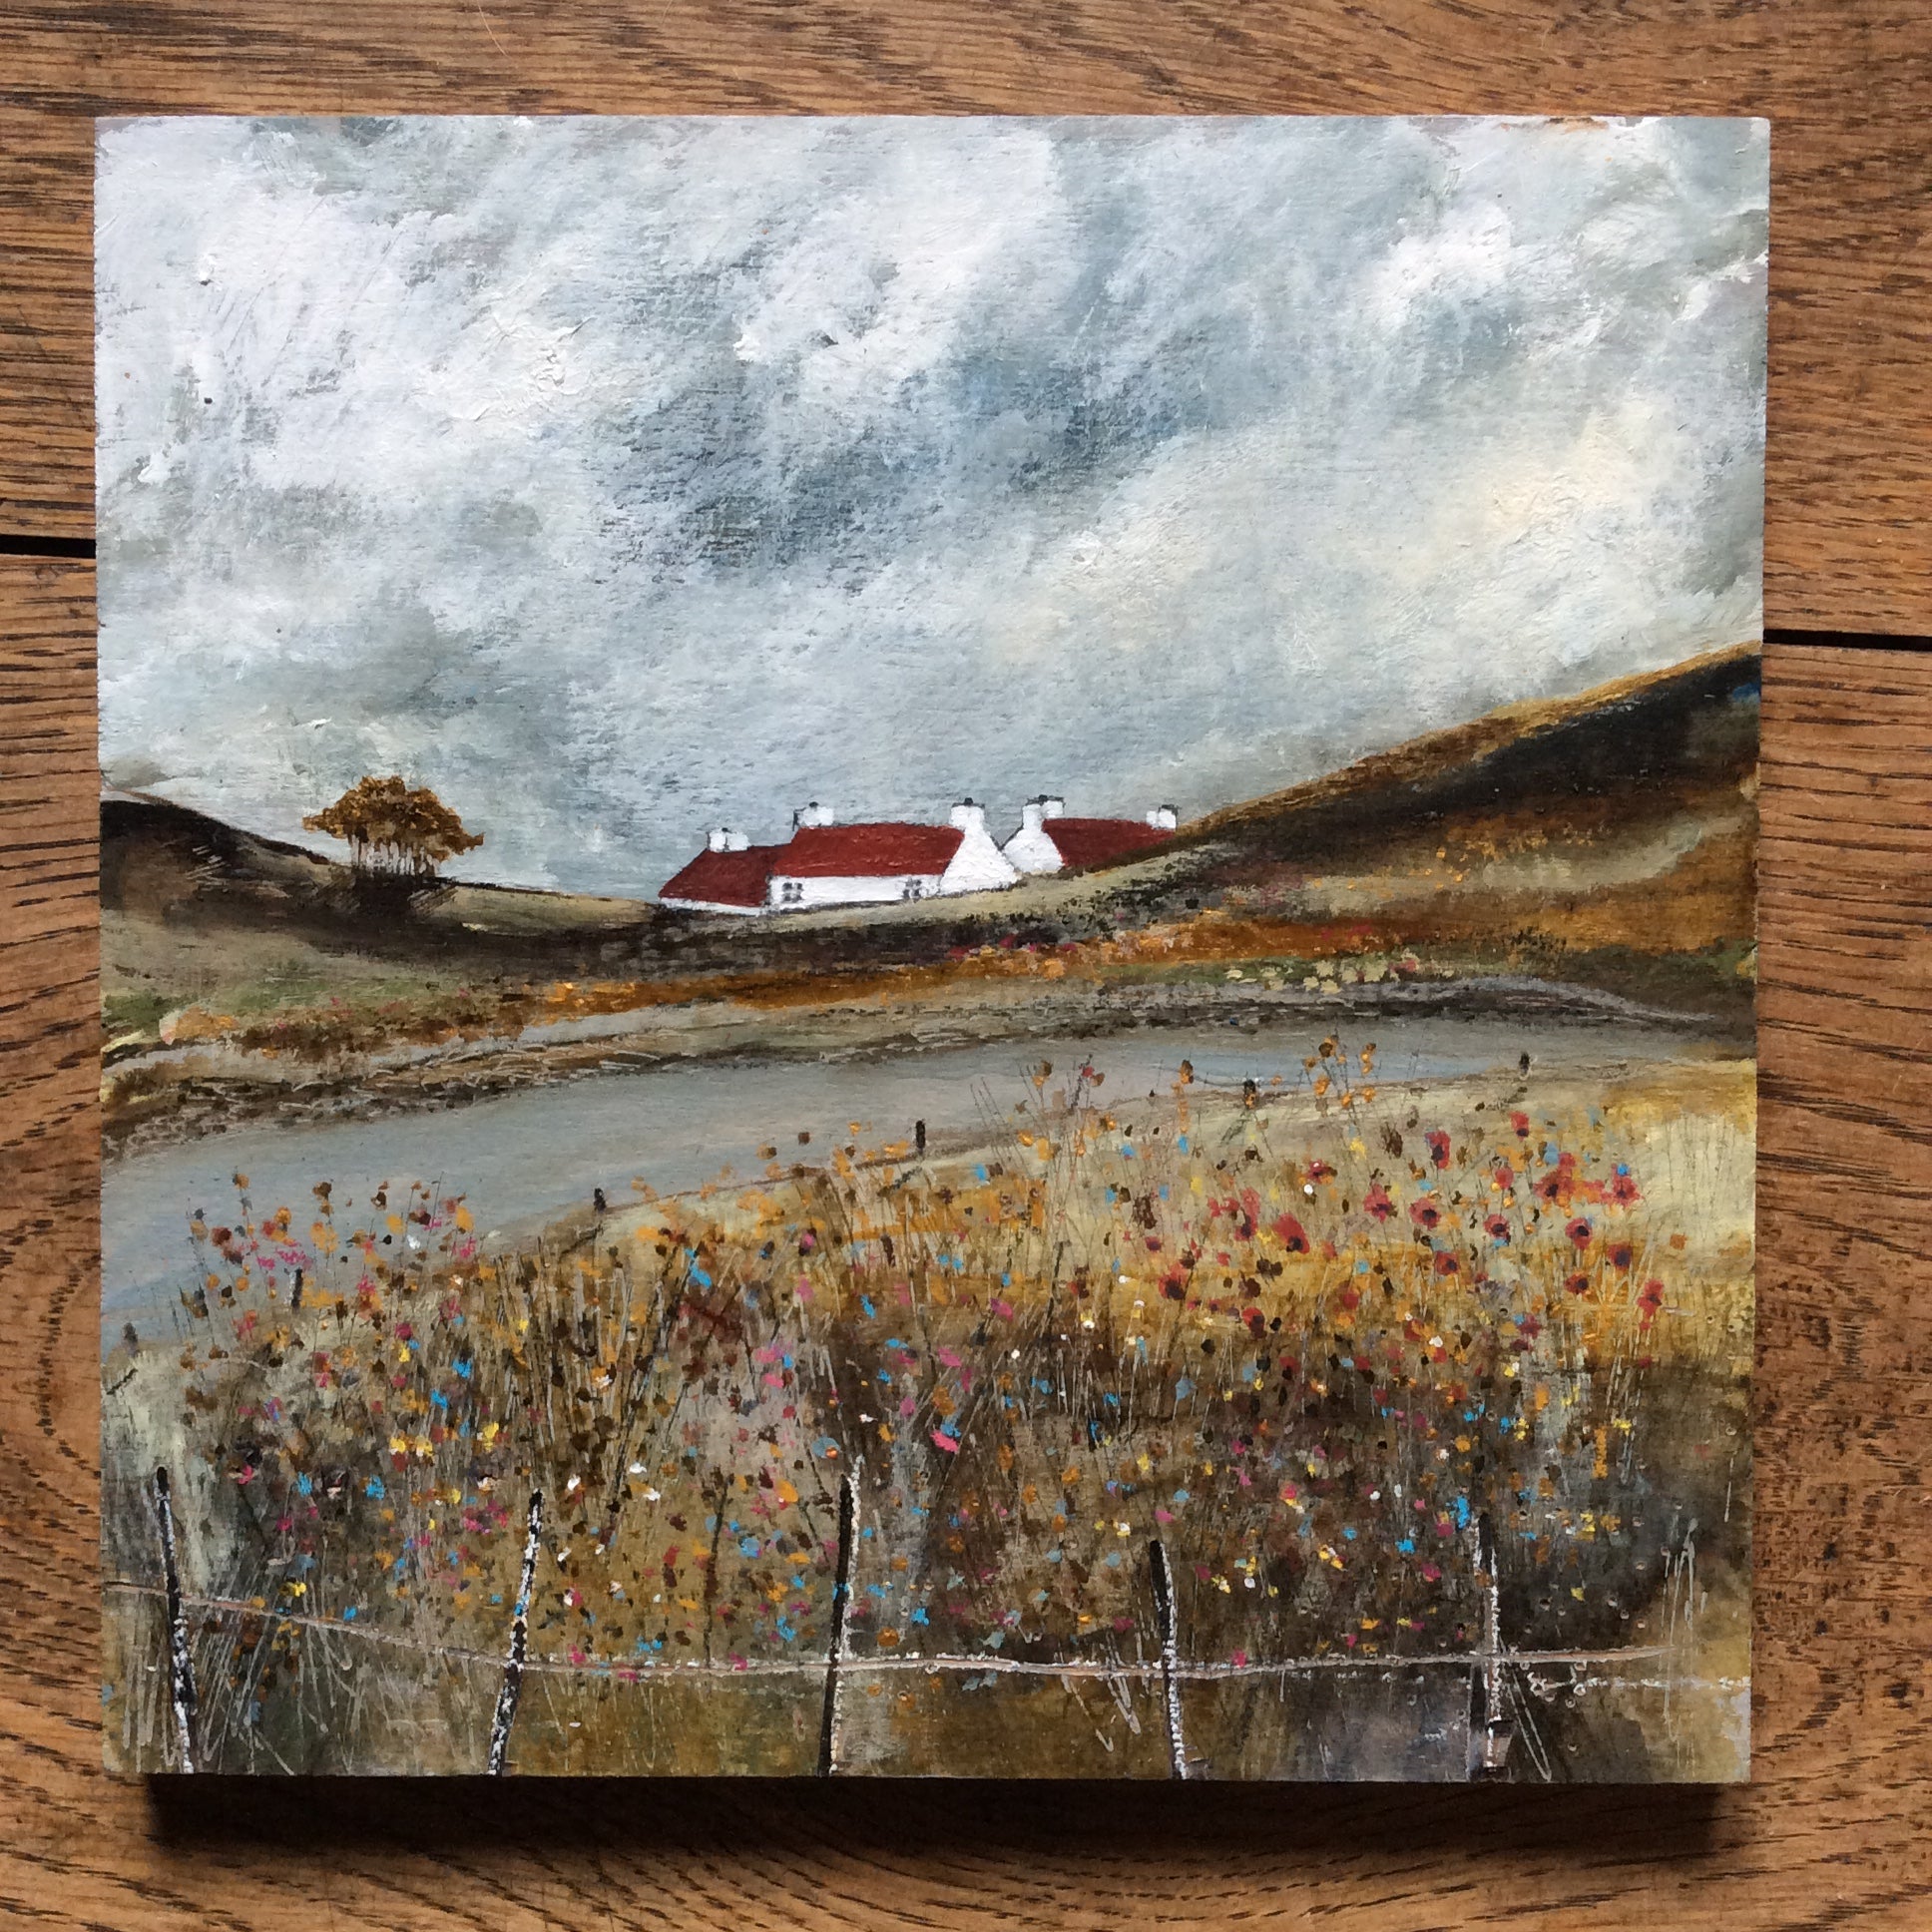 Mixed Media Art on Wood  By Louise O'Hara - “Crofters Rest”